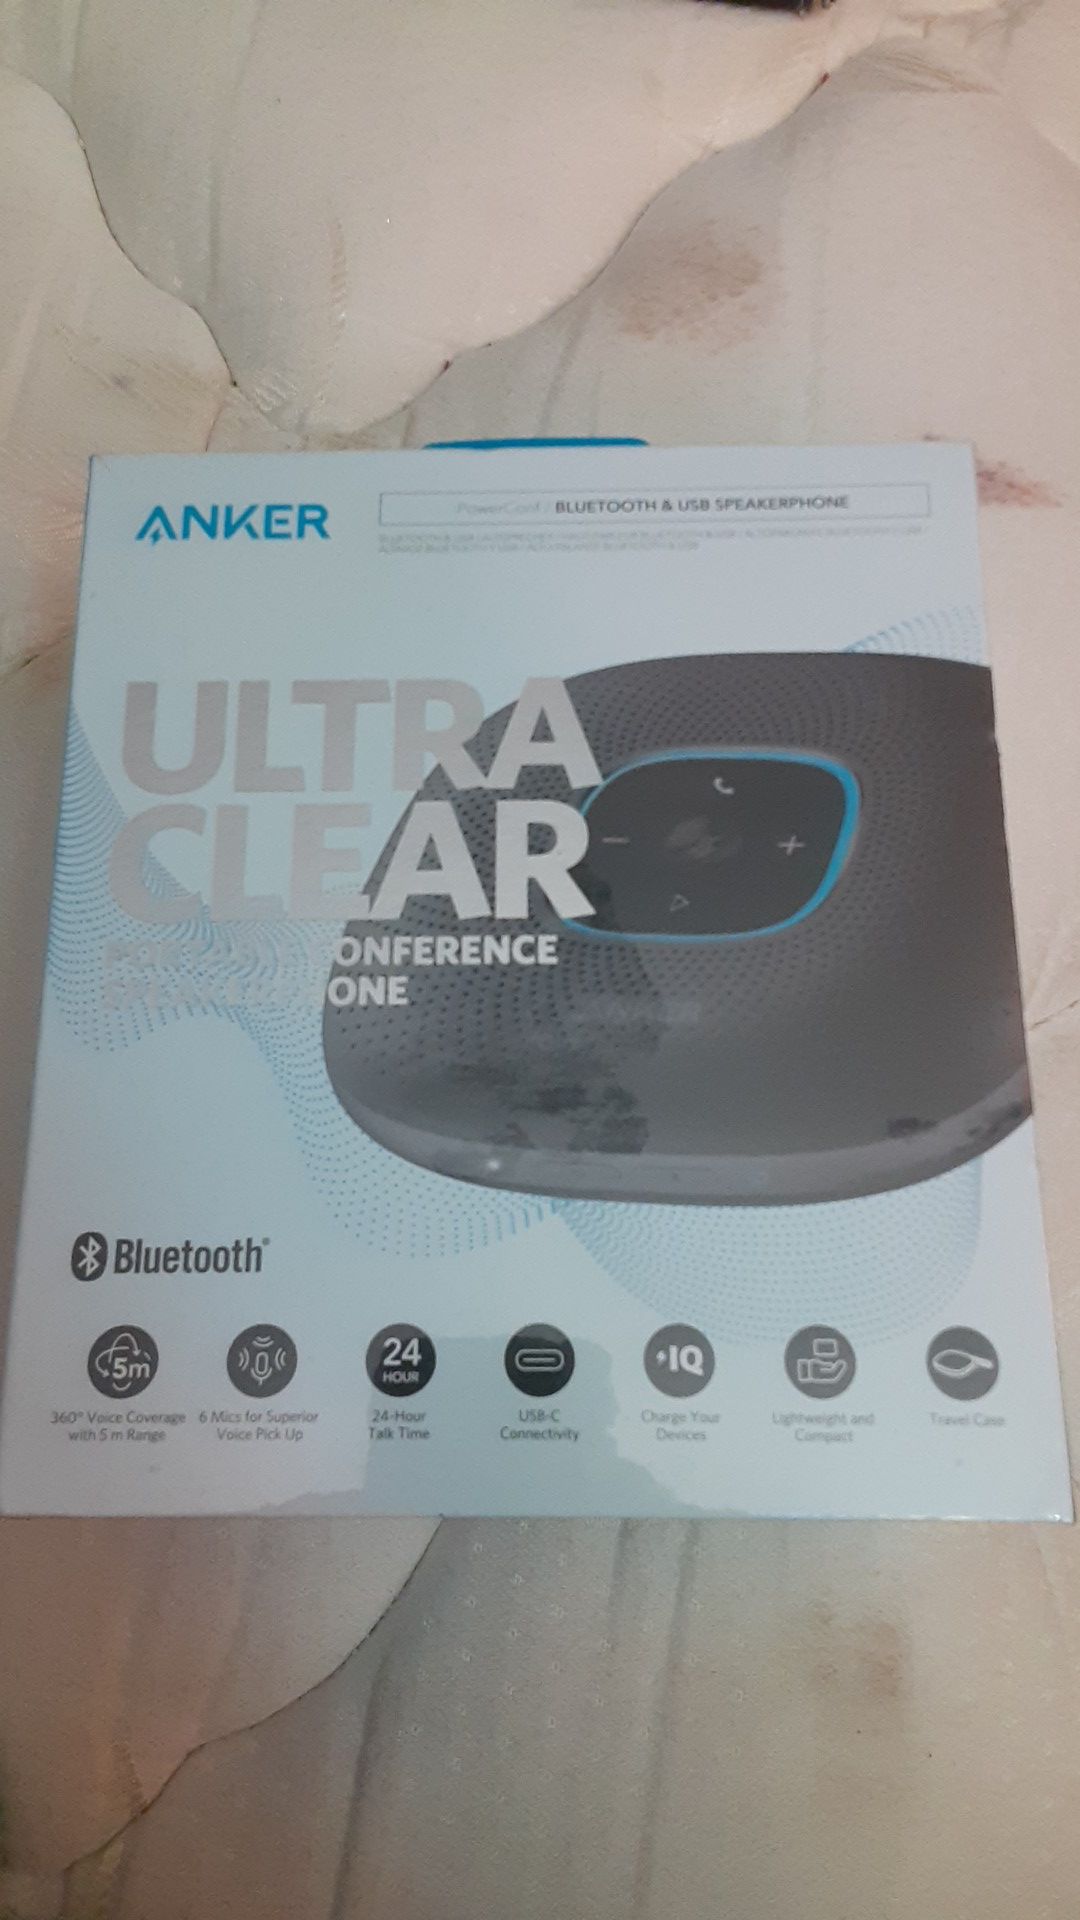 Tanker Ultra Clear Portable Conference Speaker Phone *NEW*